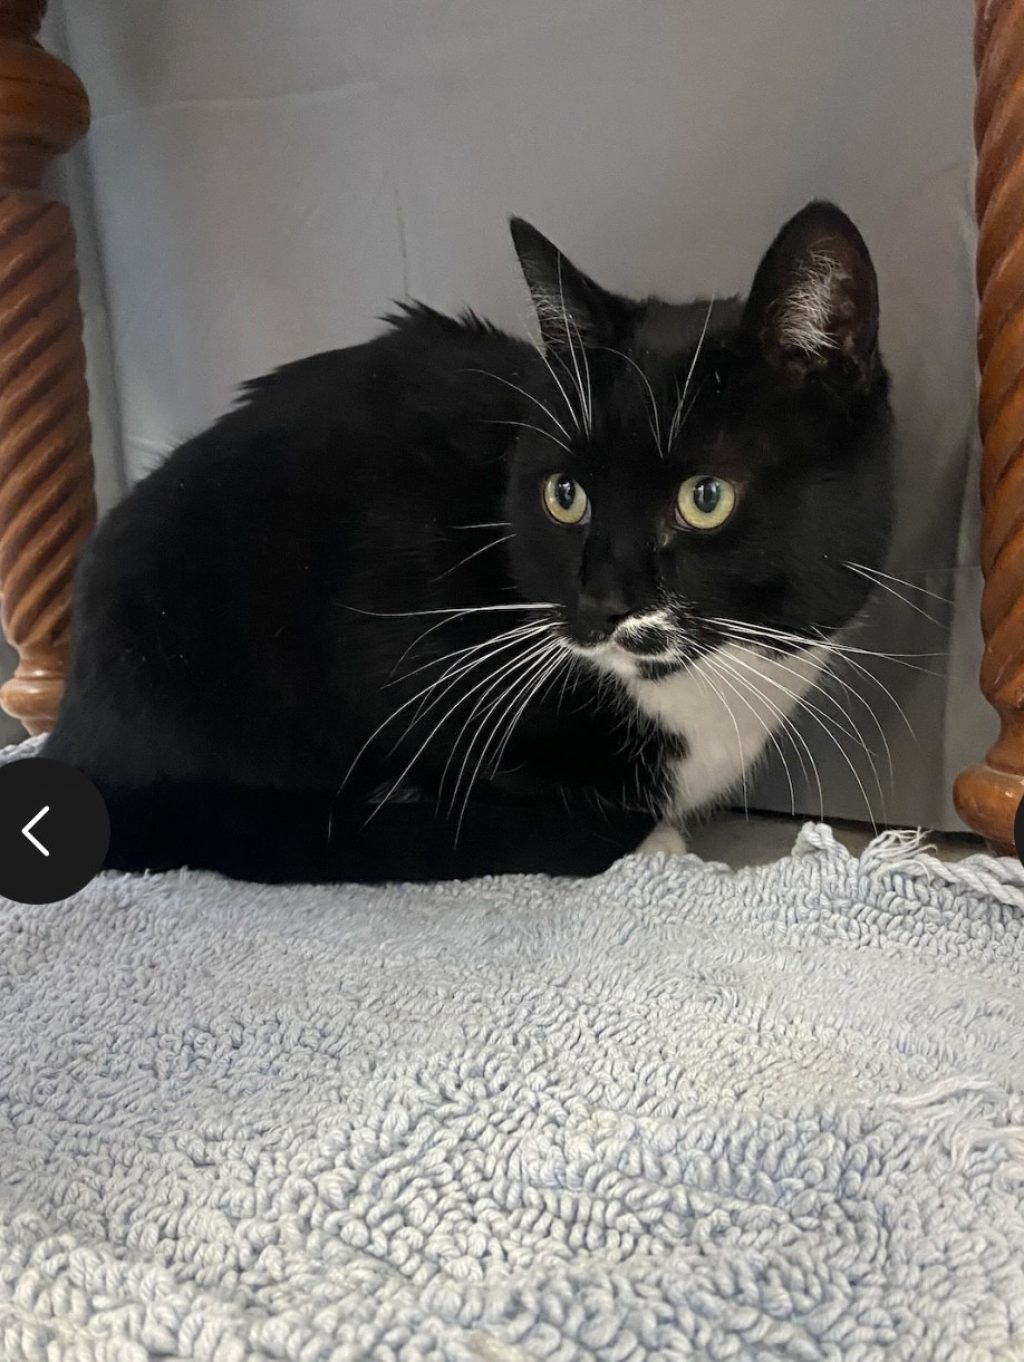 This reserved fella is Artemis.  He is shy but is slowly warming up. Artemis will let you hold him, but only if you agree to pet him at the same time. He gets along fine with other cats and is a middle aged, approximately 5-8 years old. He would love a quiet and chill home.